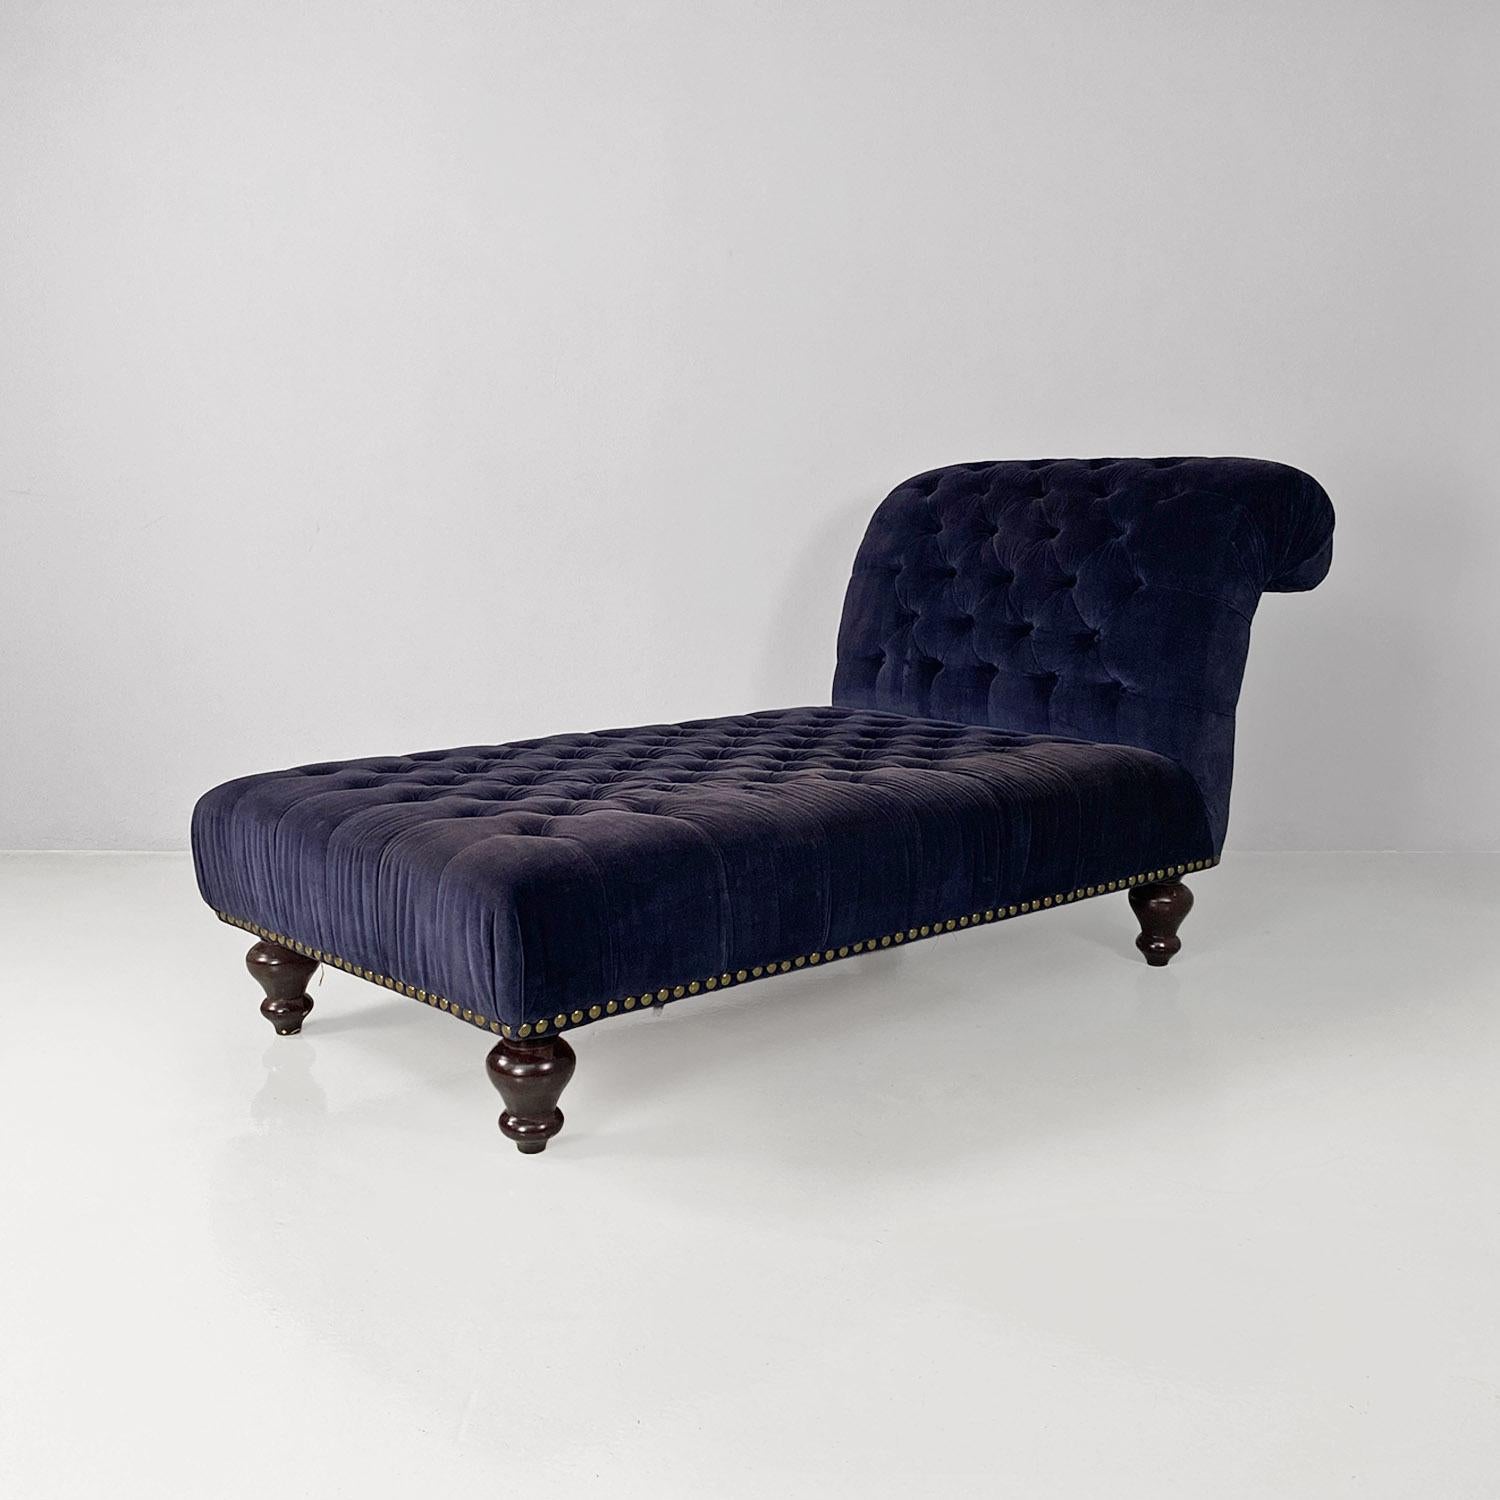 Italian antique style blue velvet and wood dormeuse or chaise longue, 1980s.
Large daybed, covered in dark blue velvet with quilting and studs and turned wooden feet to support the structure.
1980 approx.
Very good condition.
Measurements in cm